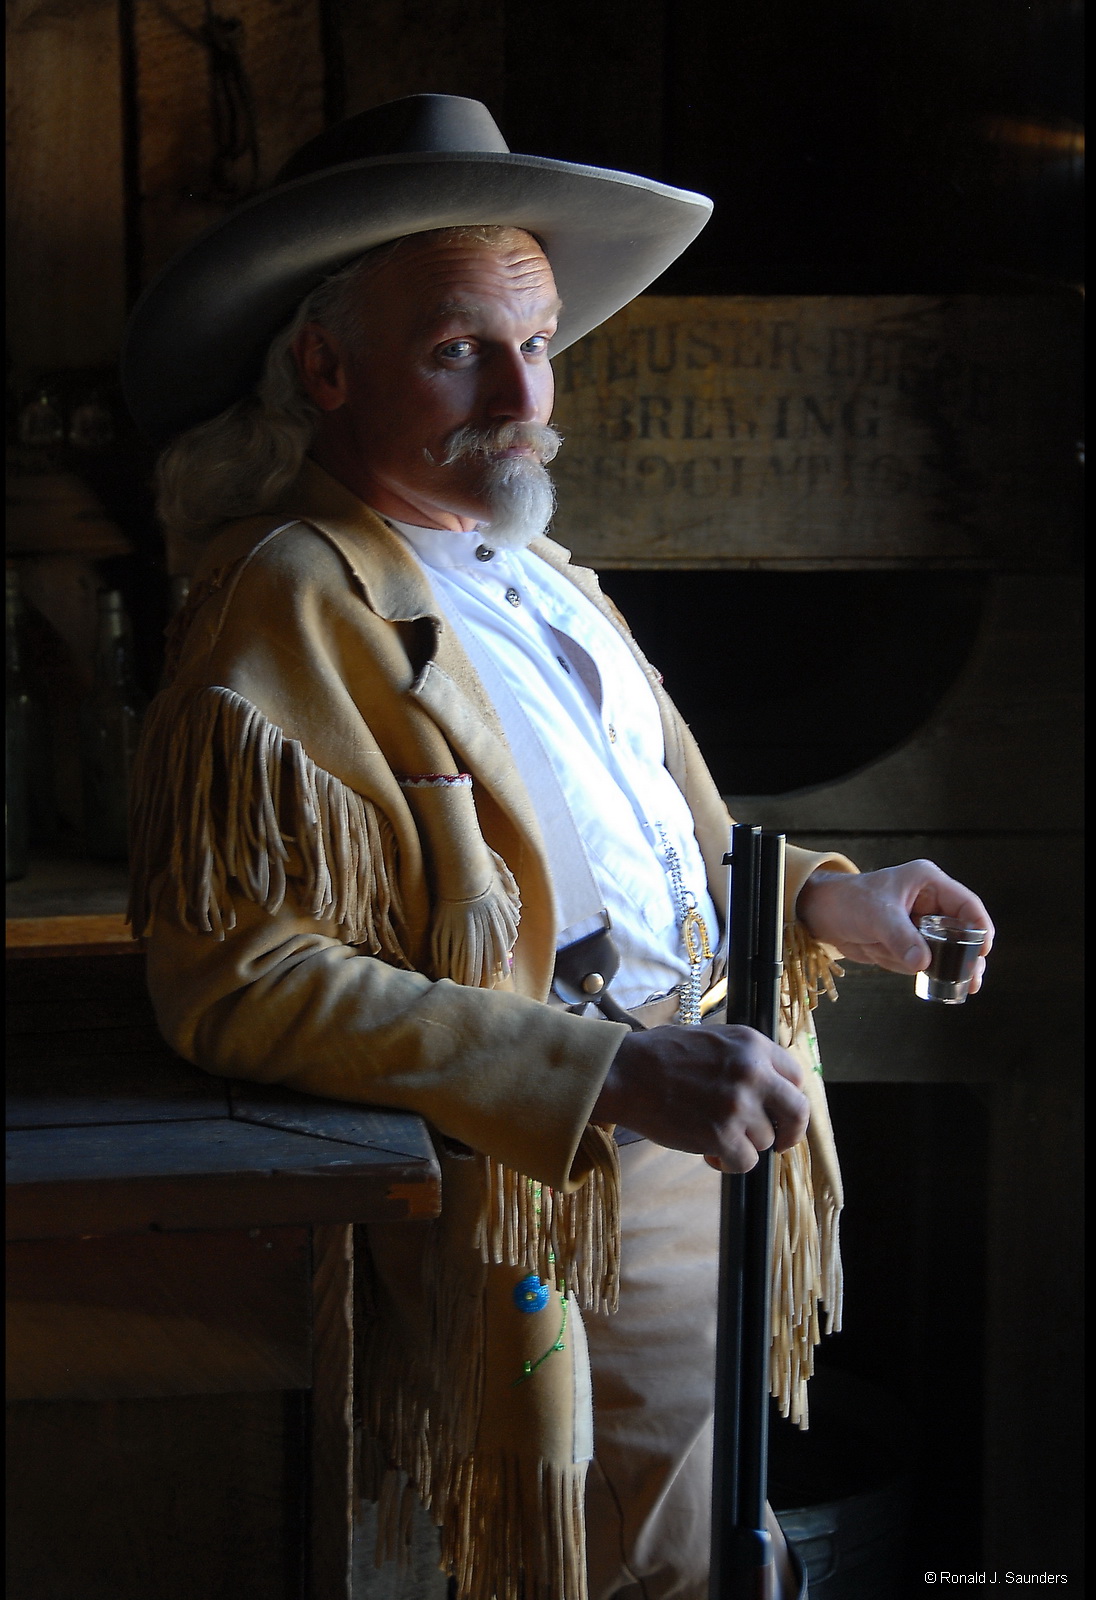 Jake Barzig performs as Buffalo Bill in the histortc saloon at Silver City, Wyoming.